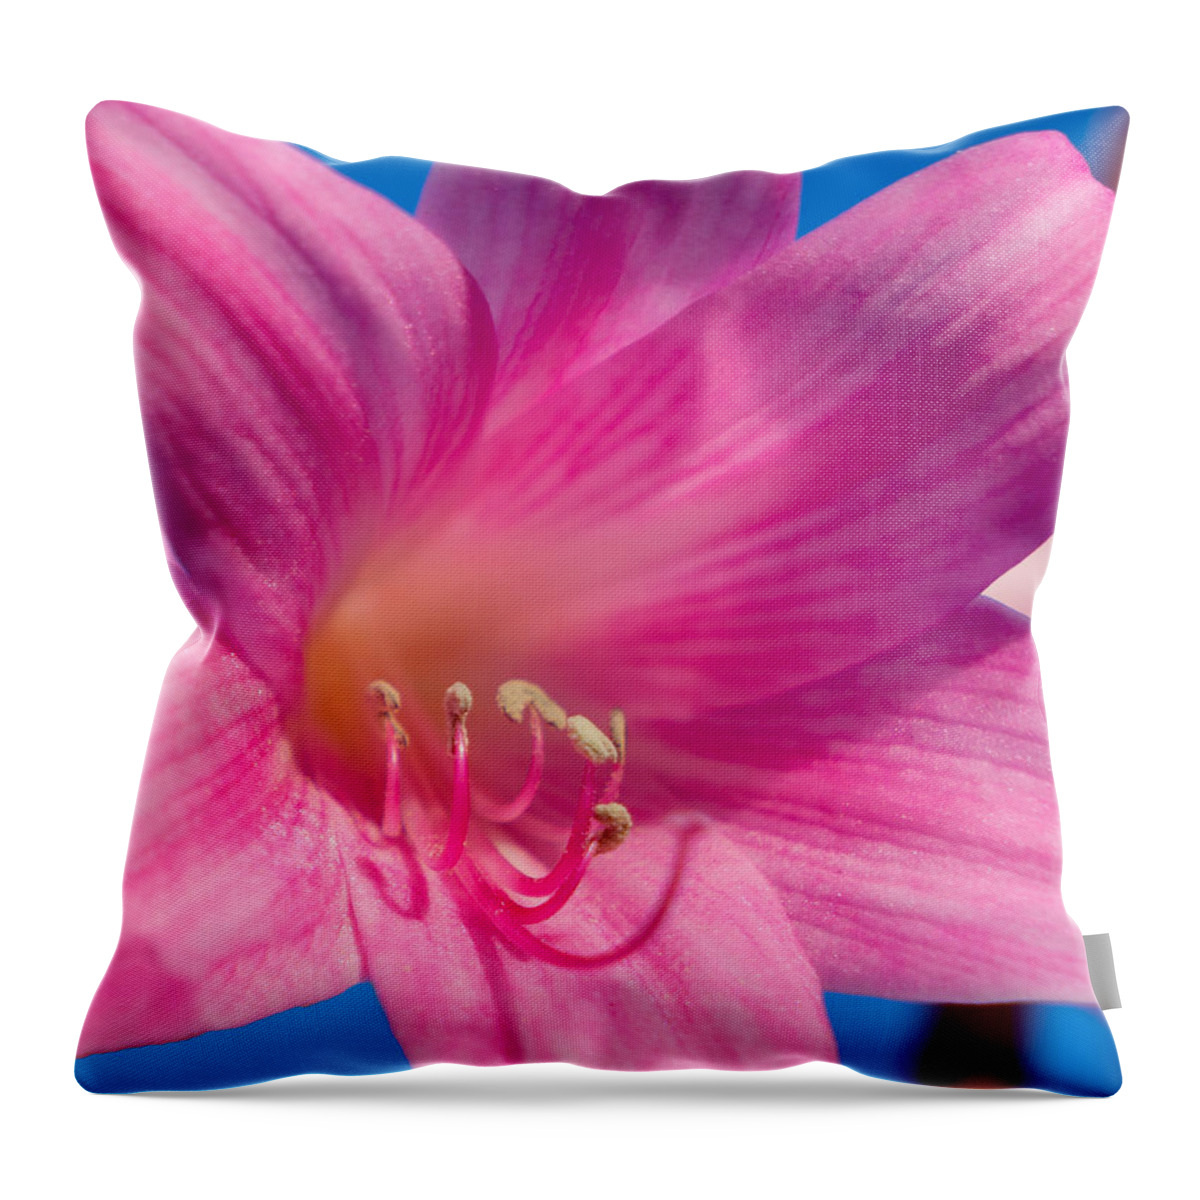 Flower Throw Pillow featuring the photograph Naked Lady by Derek Dean